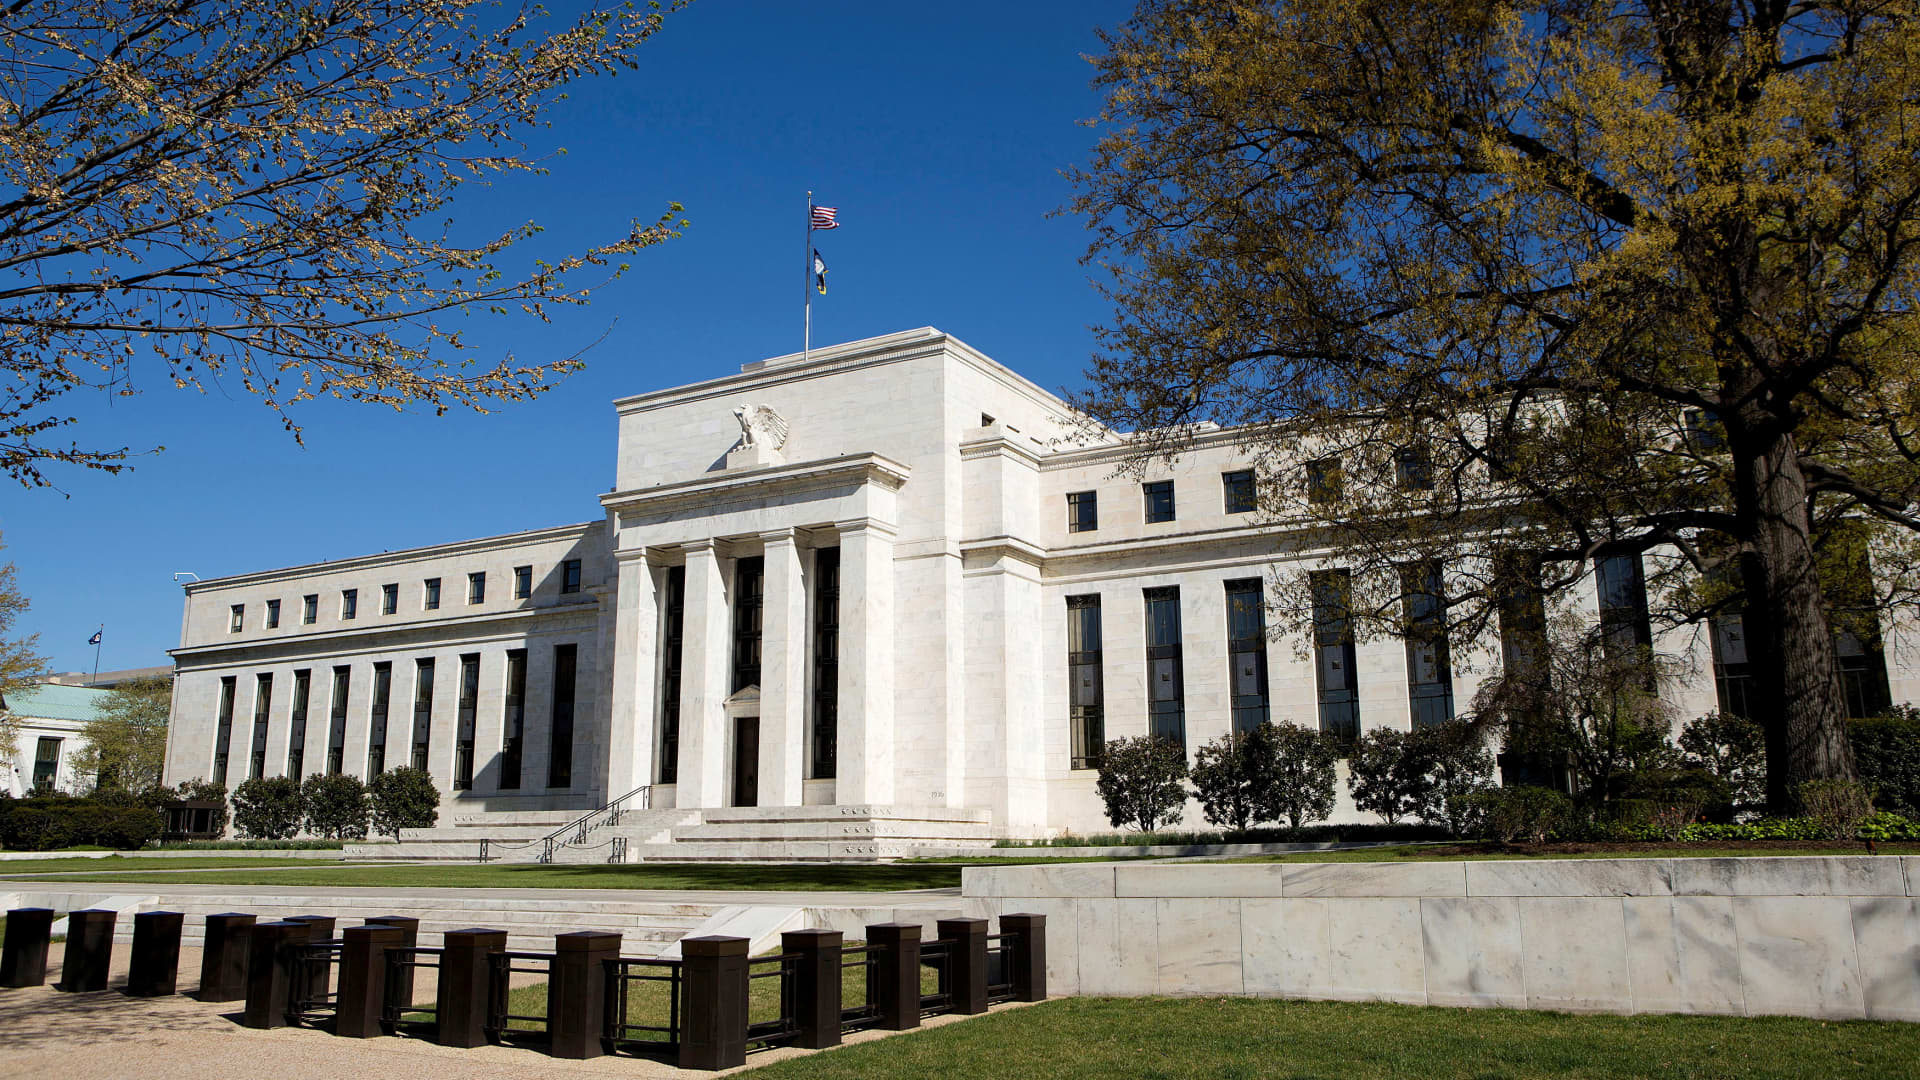 The Federal Reserve Building stands in Washington, D.C.